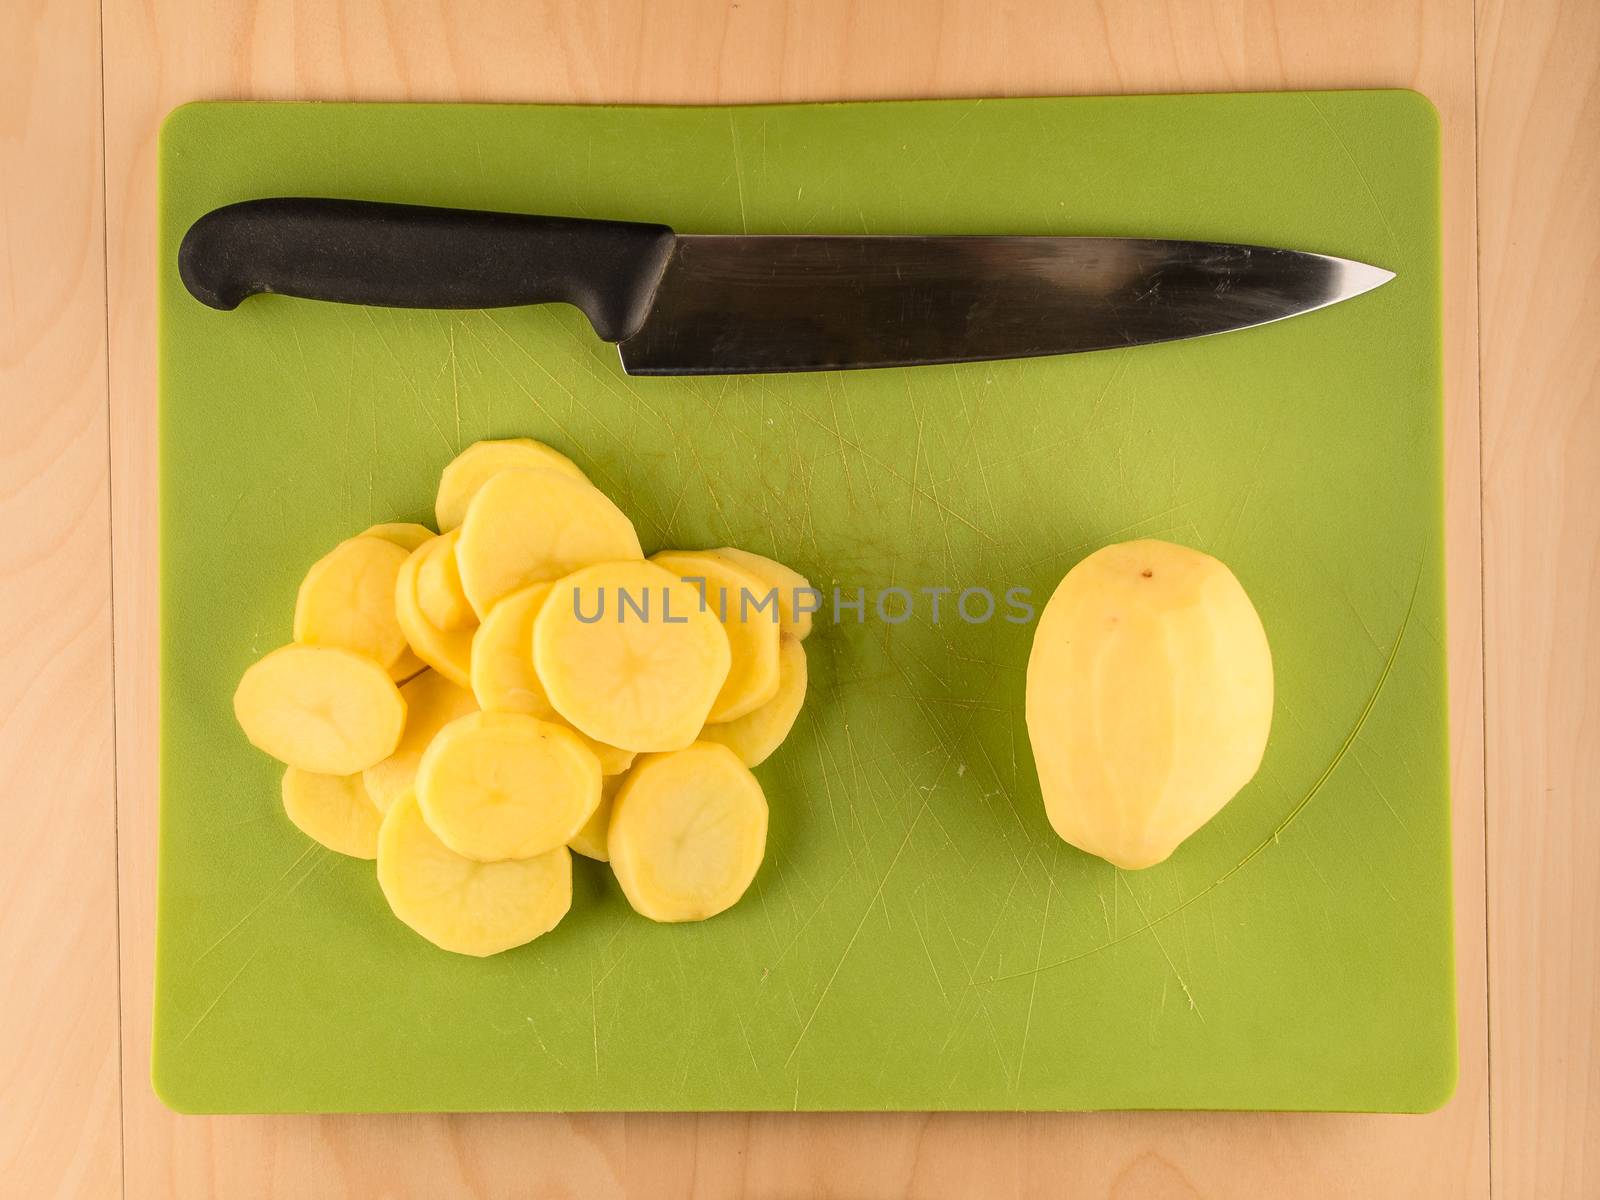 Sliced potatoes and knife on green plastic board by weruskak